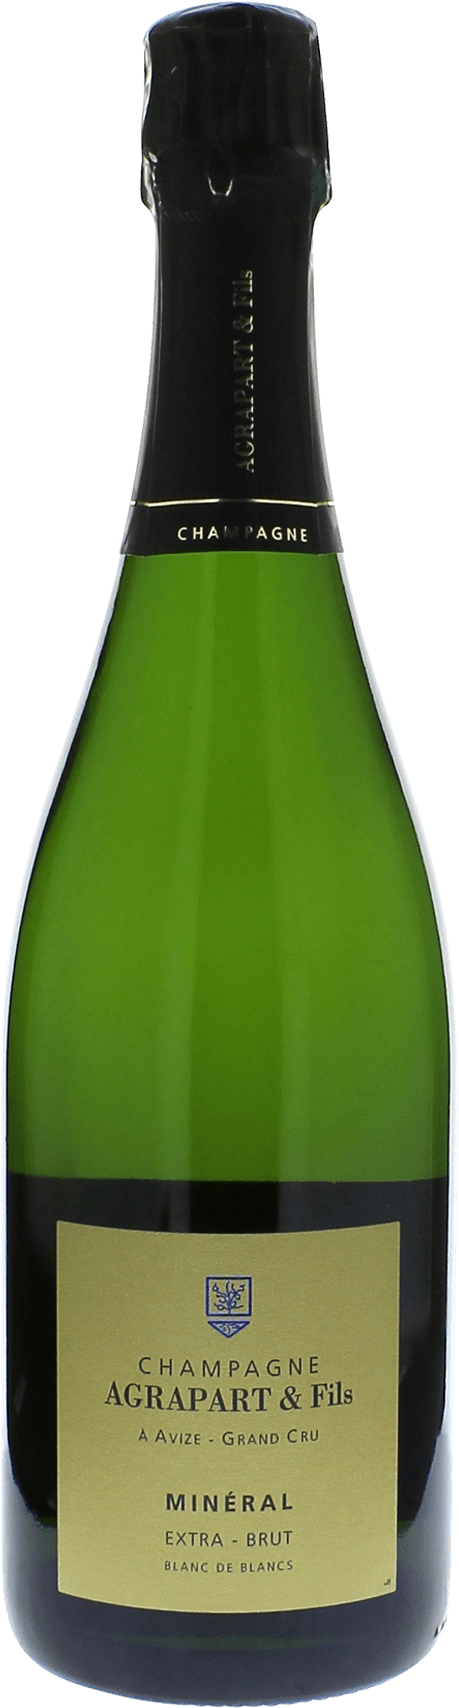 Agrapart  mineral extra brut blanc de blancs 2012  Champagne, Agrapart